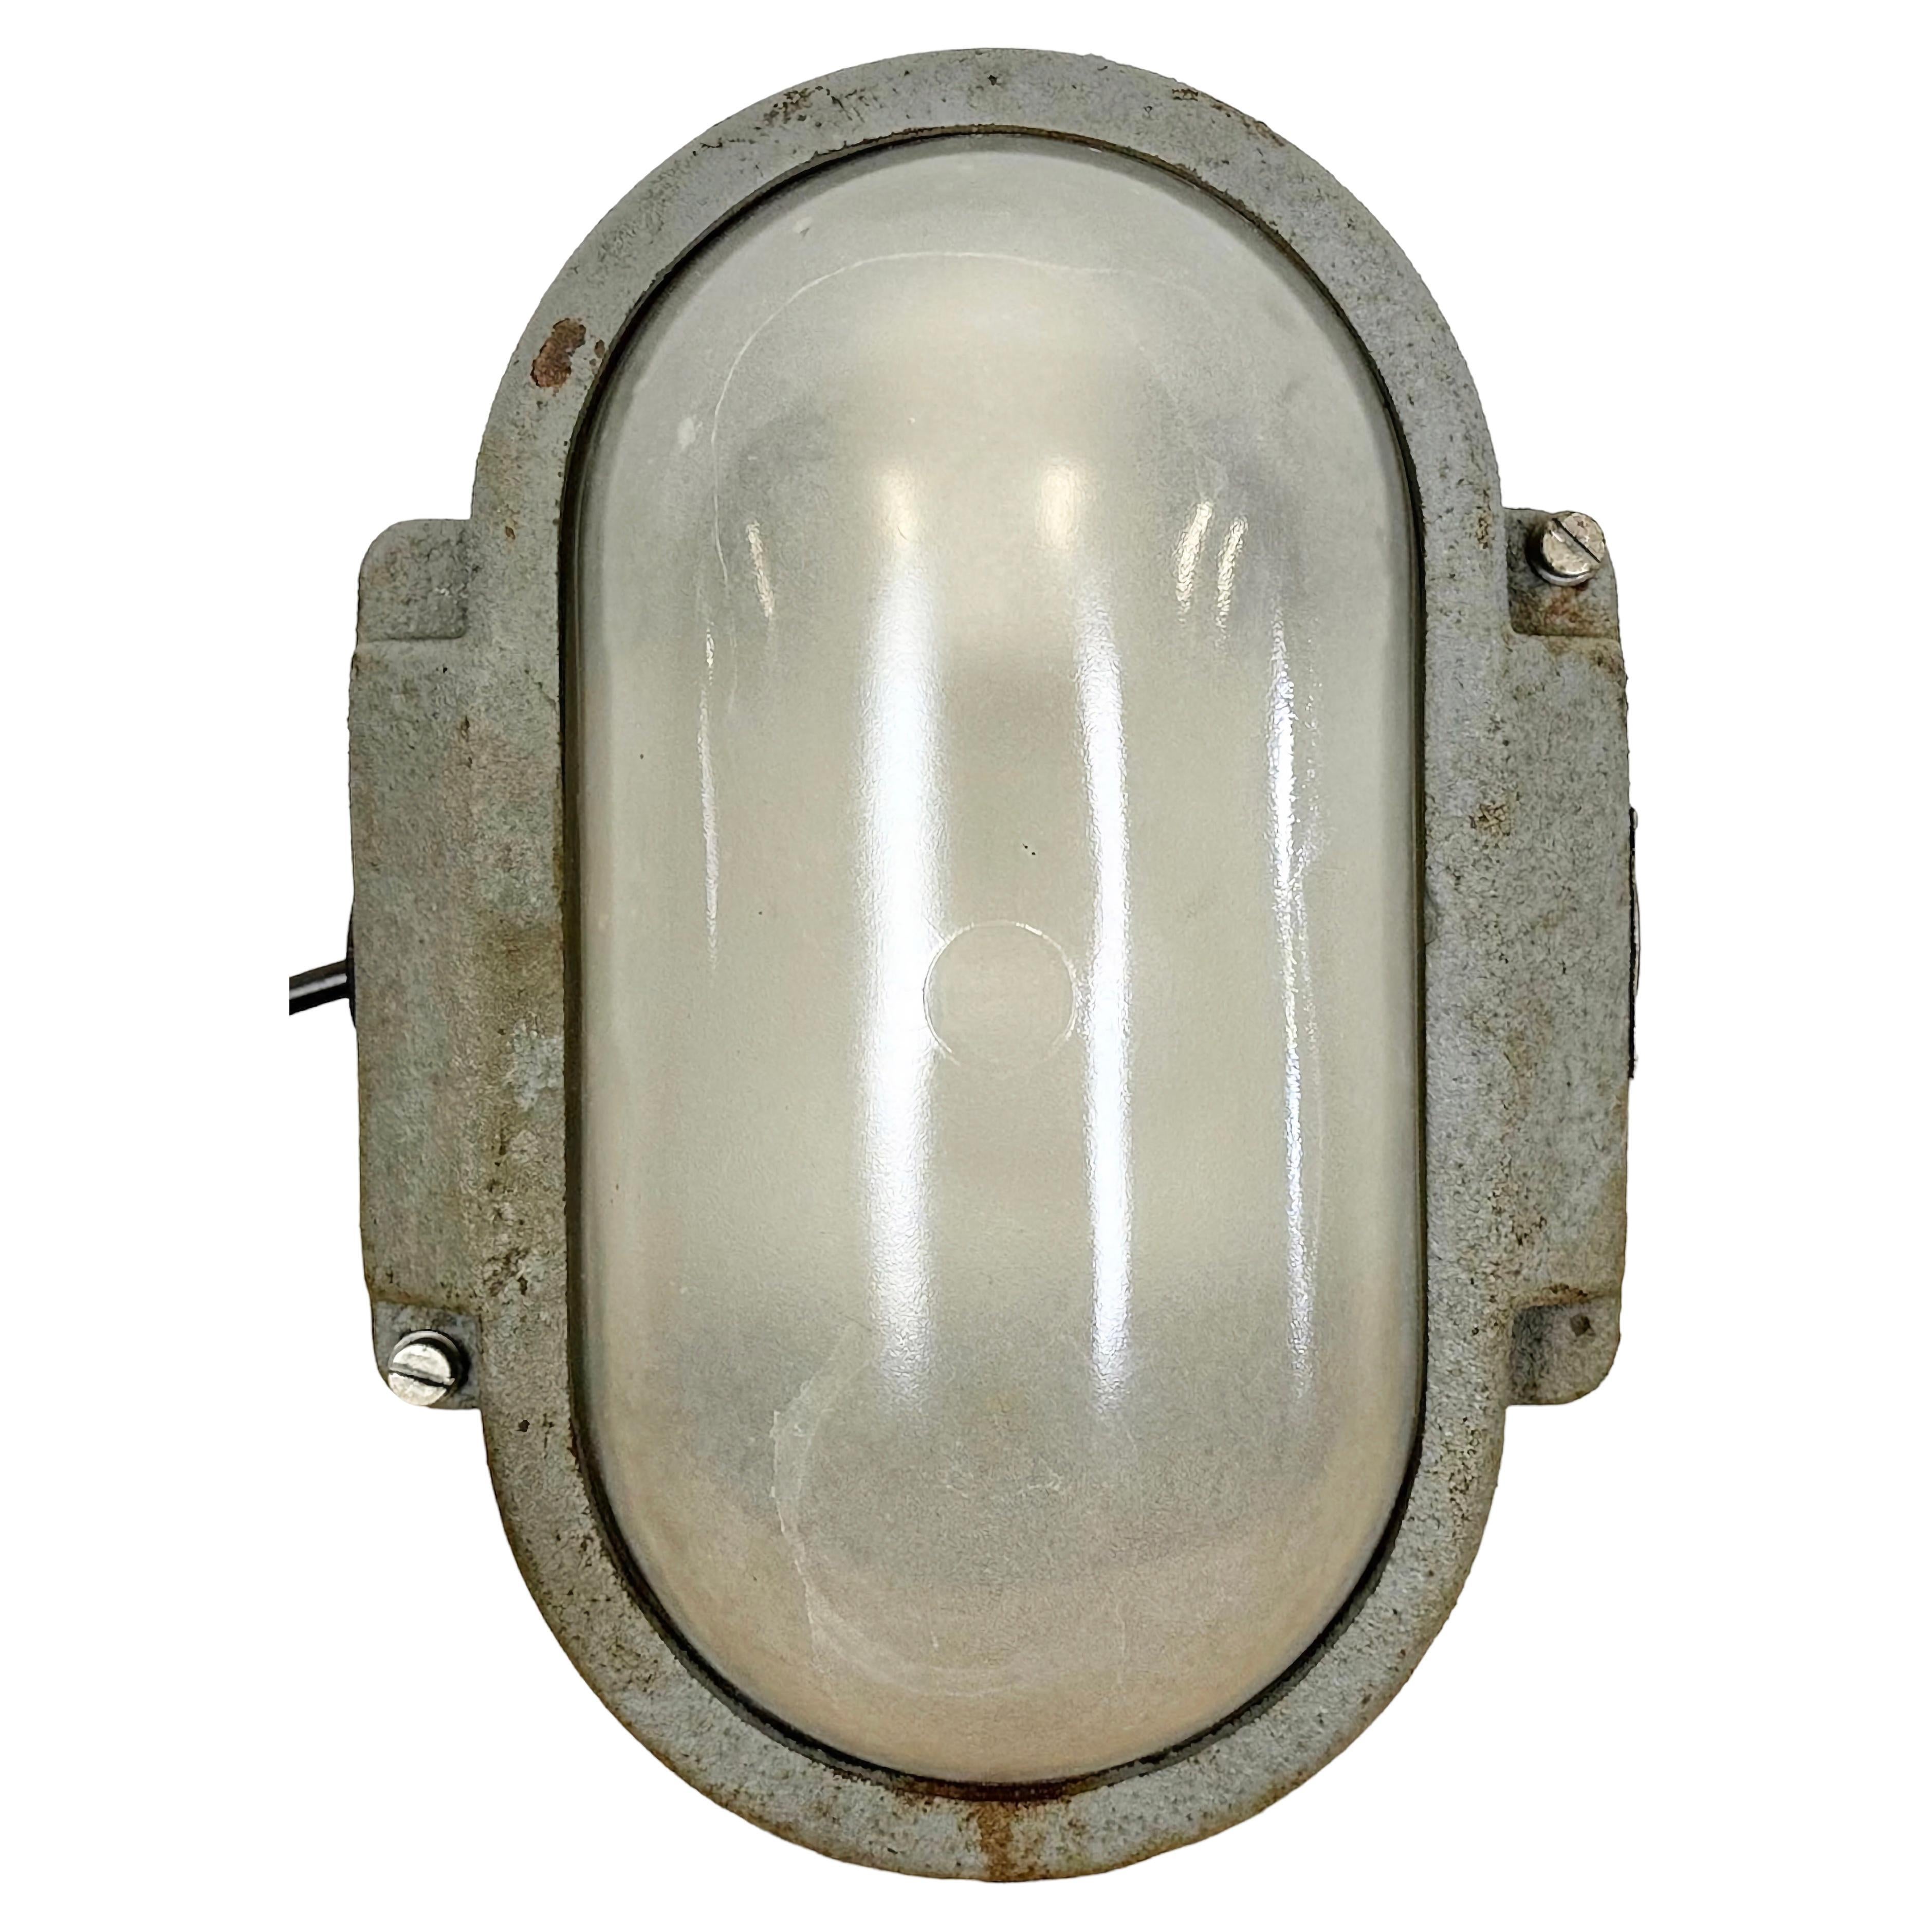 Industrial wall light made by Elektrosvit in former Czechoslovakia during the 1960s. It features a cast iron body and a milk glass cover. The porcelain socket requires E 27/ E26 light bulbs. New wire. The weight of the light is 5 kg.